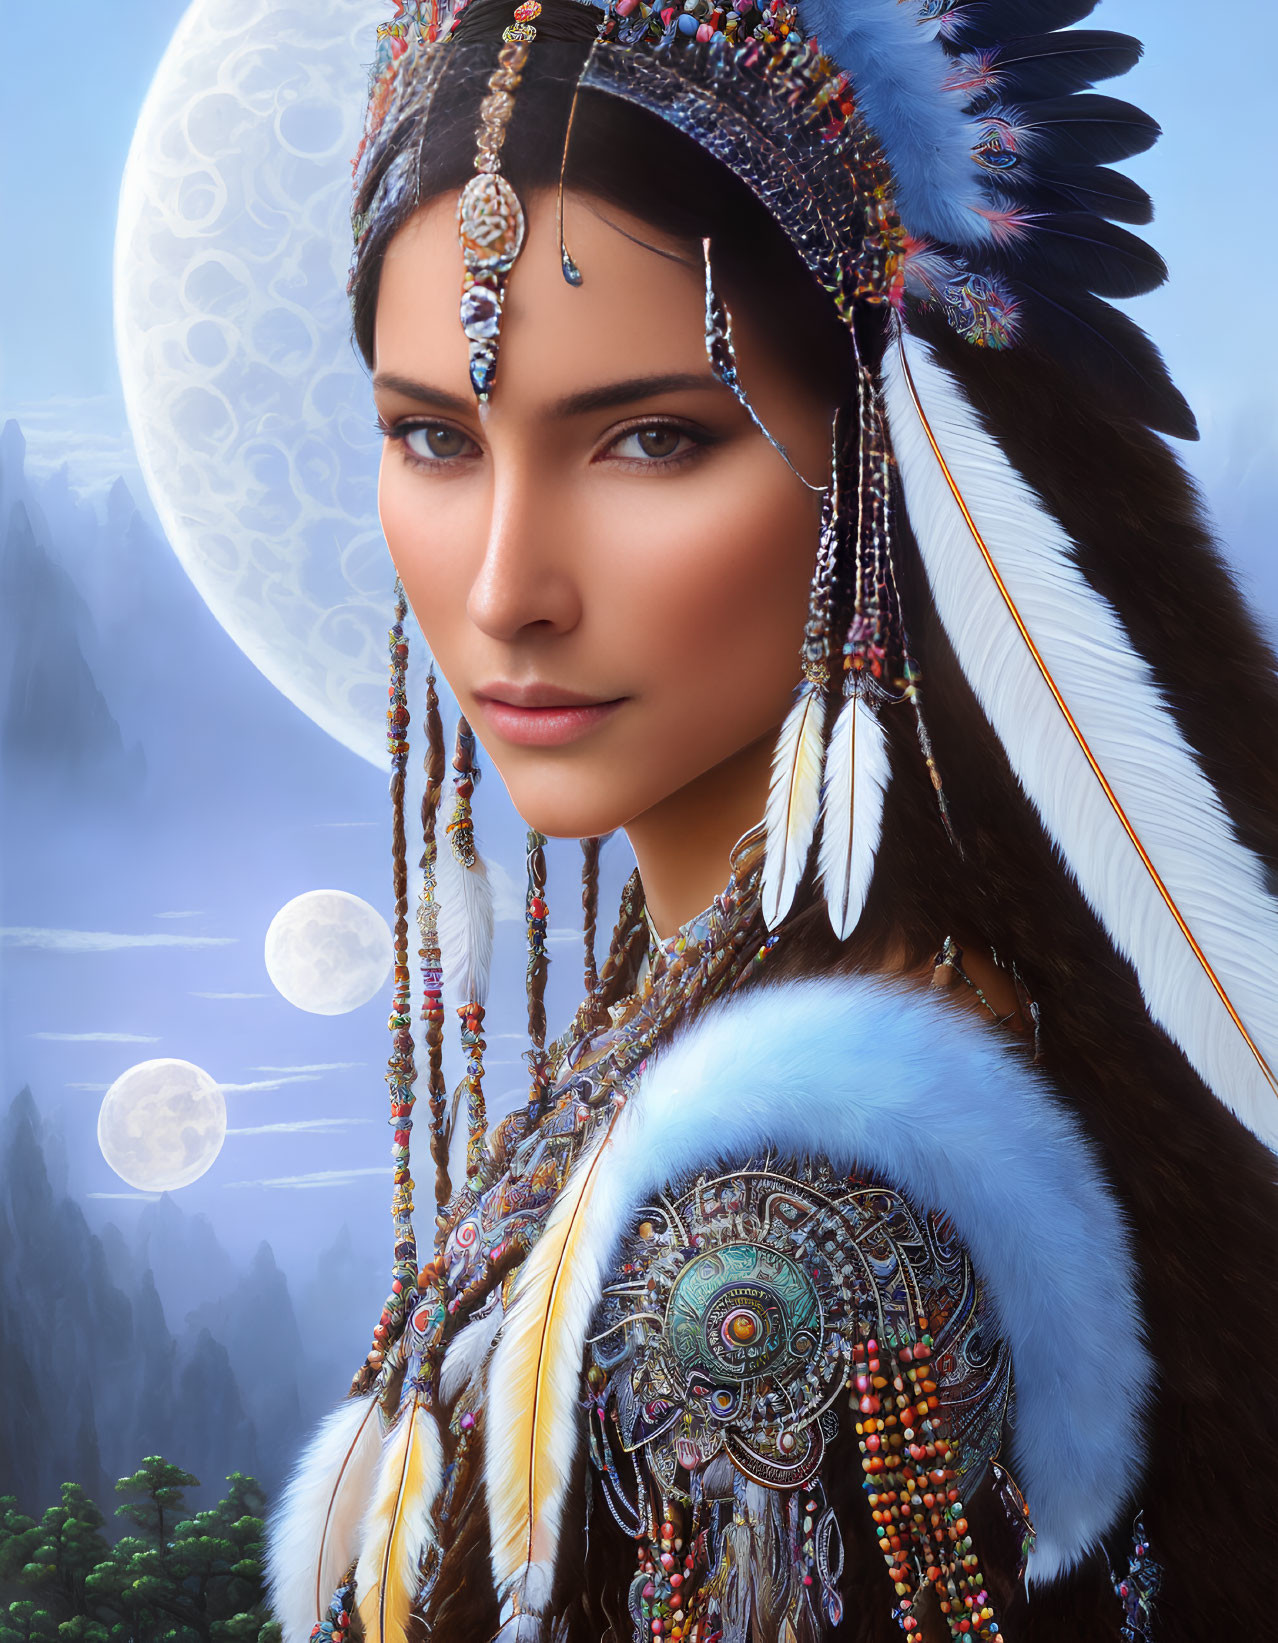 Woman in Native American headdress against mountain backdrop with multiple moons